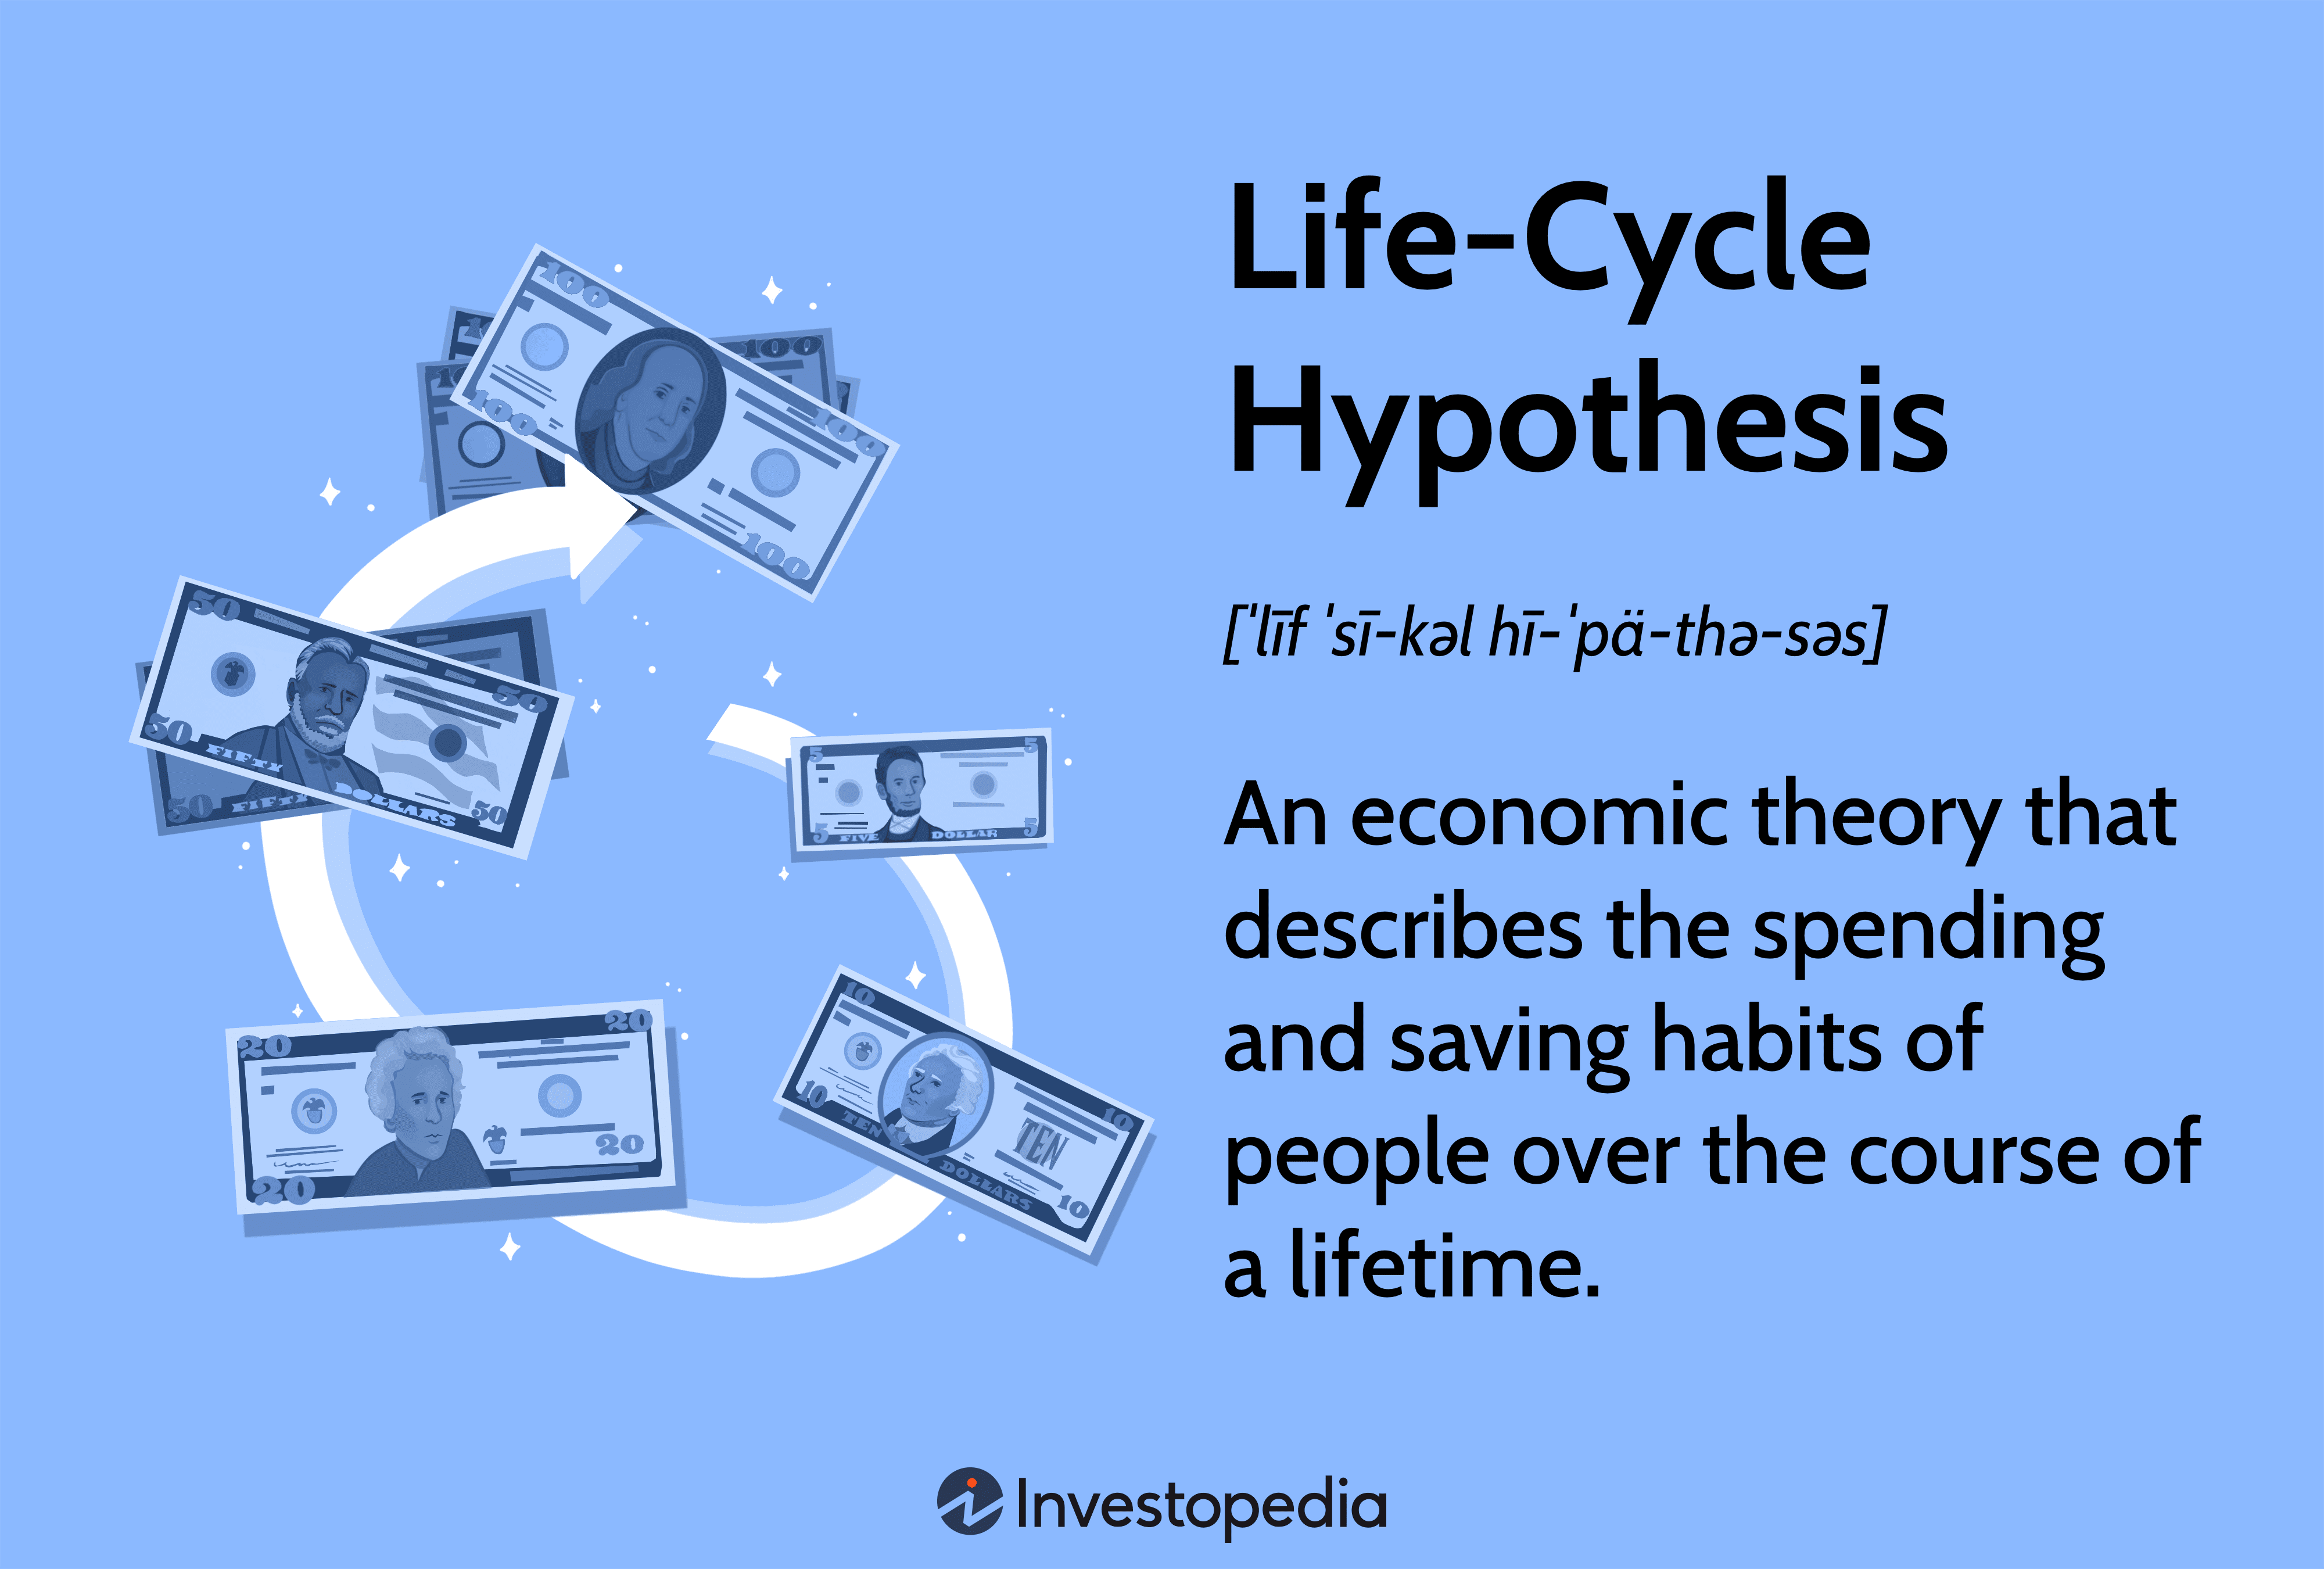 Life-Cycle Hypothesis: An economic theory that describes the spending and saving habits of people over the course of a lifetime.